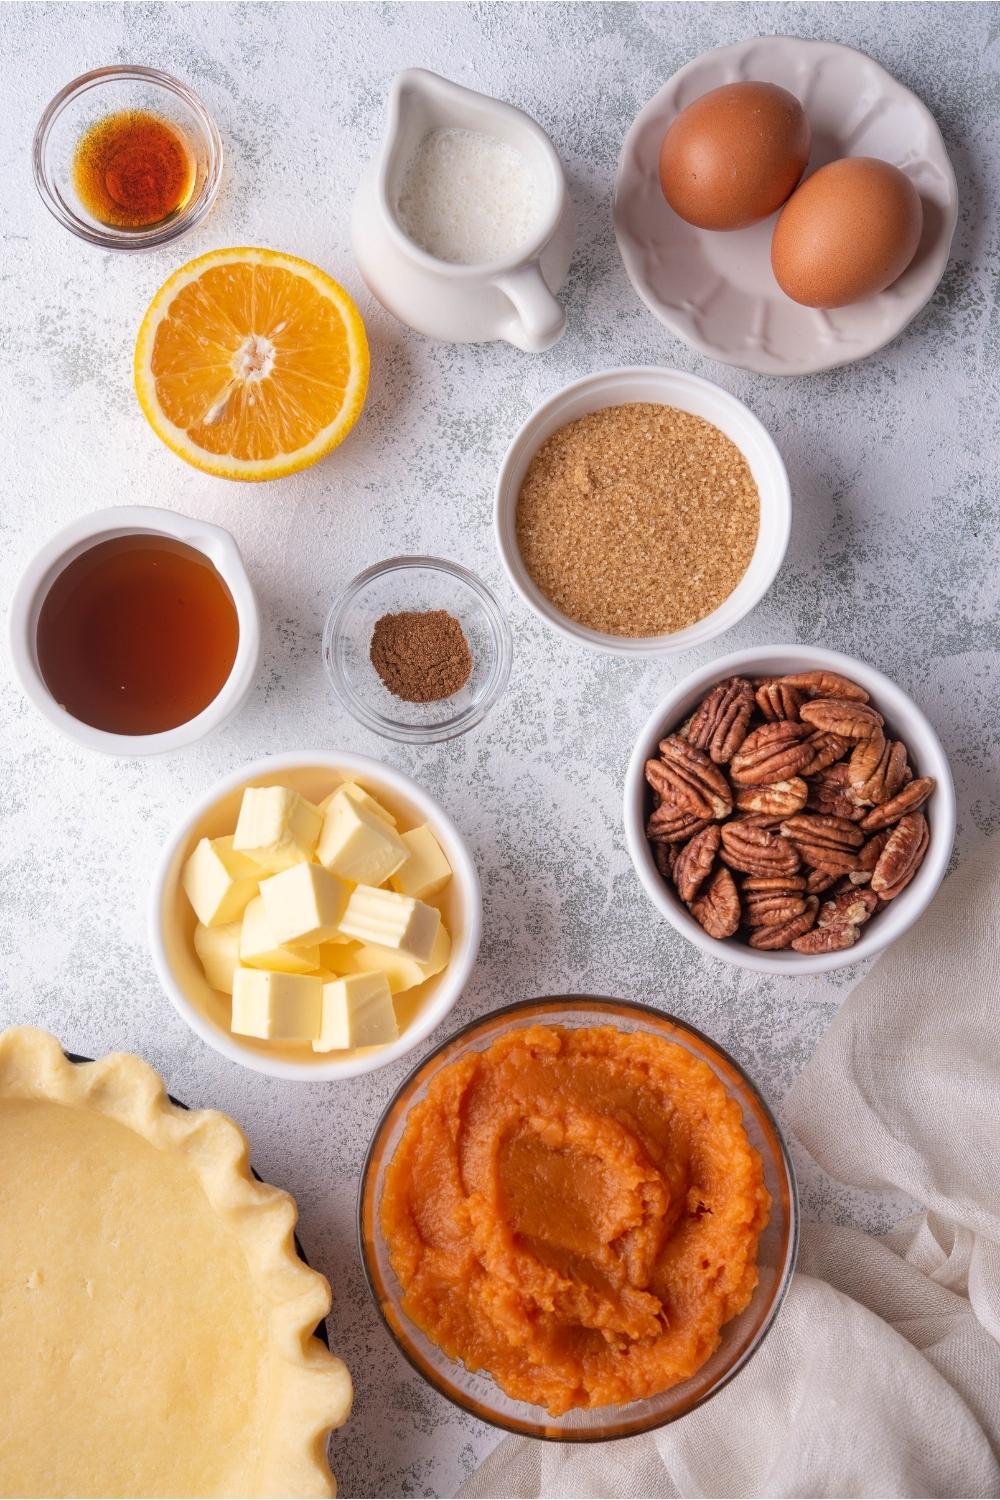 An assortment of ingredients for sweet potato pecan pie including bowls of butter, pecans, mashed sweet potato, sugar, maple syrup, and an unbaked pie crust.